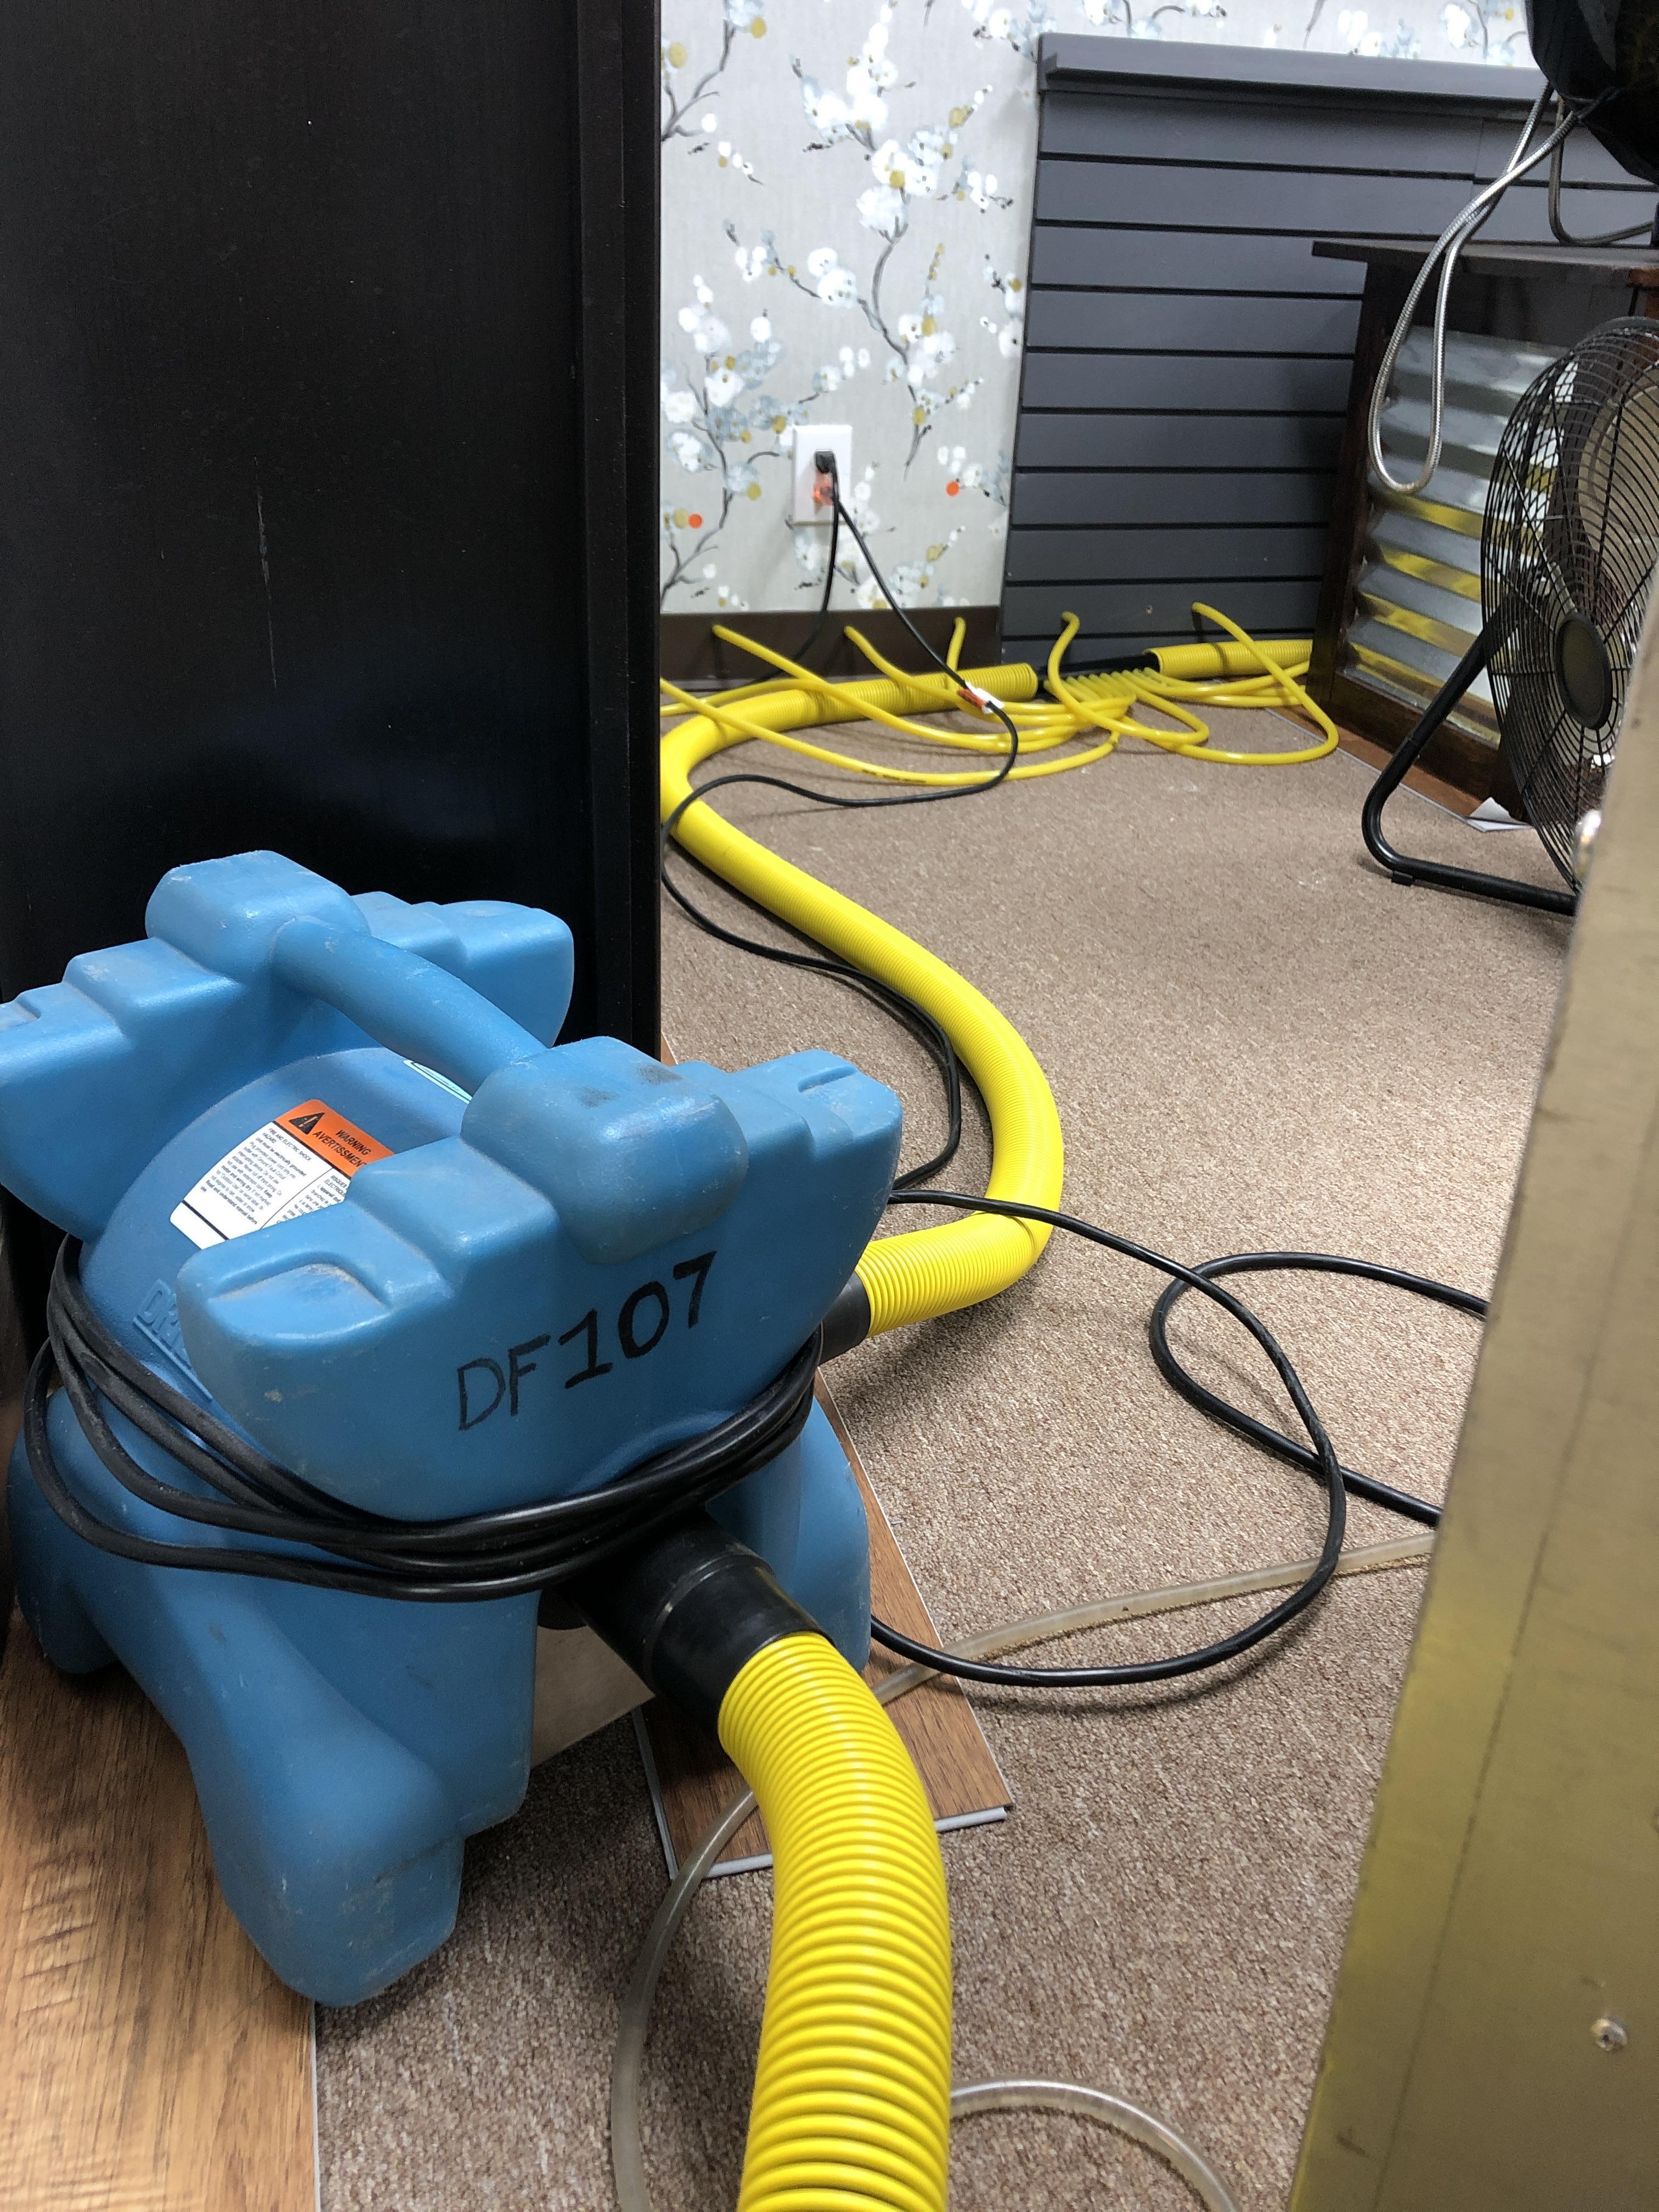 Air dryers and dehumidifier downstairs